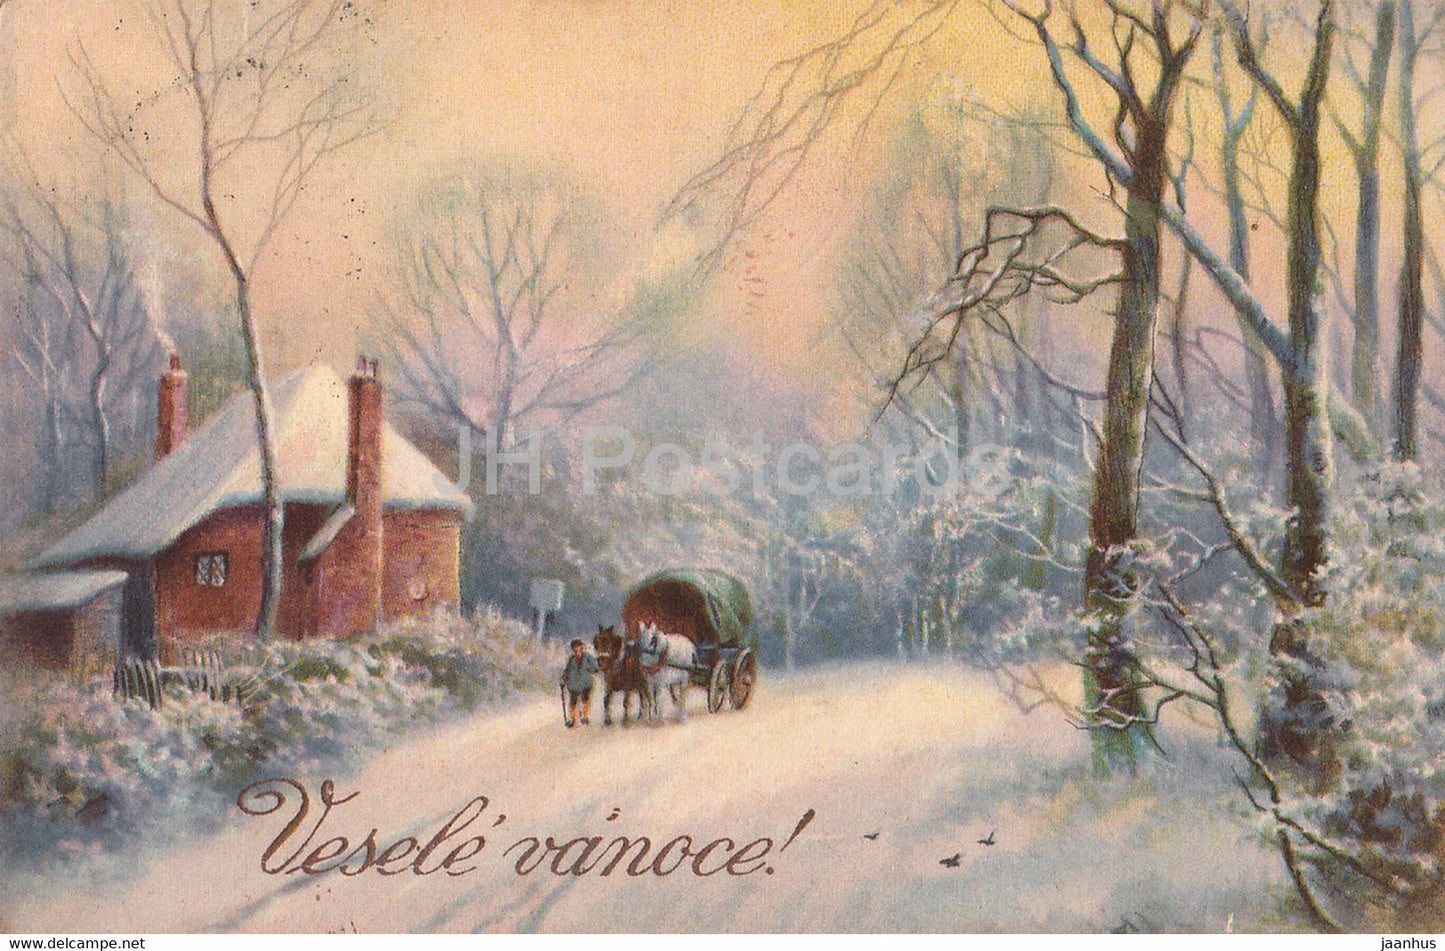 Christmas Greeting Card - Vesele vanoce - horse carriage - illustration - 1414 - old postcard - Czech Republic - used - JH Postcards